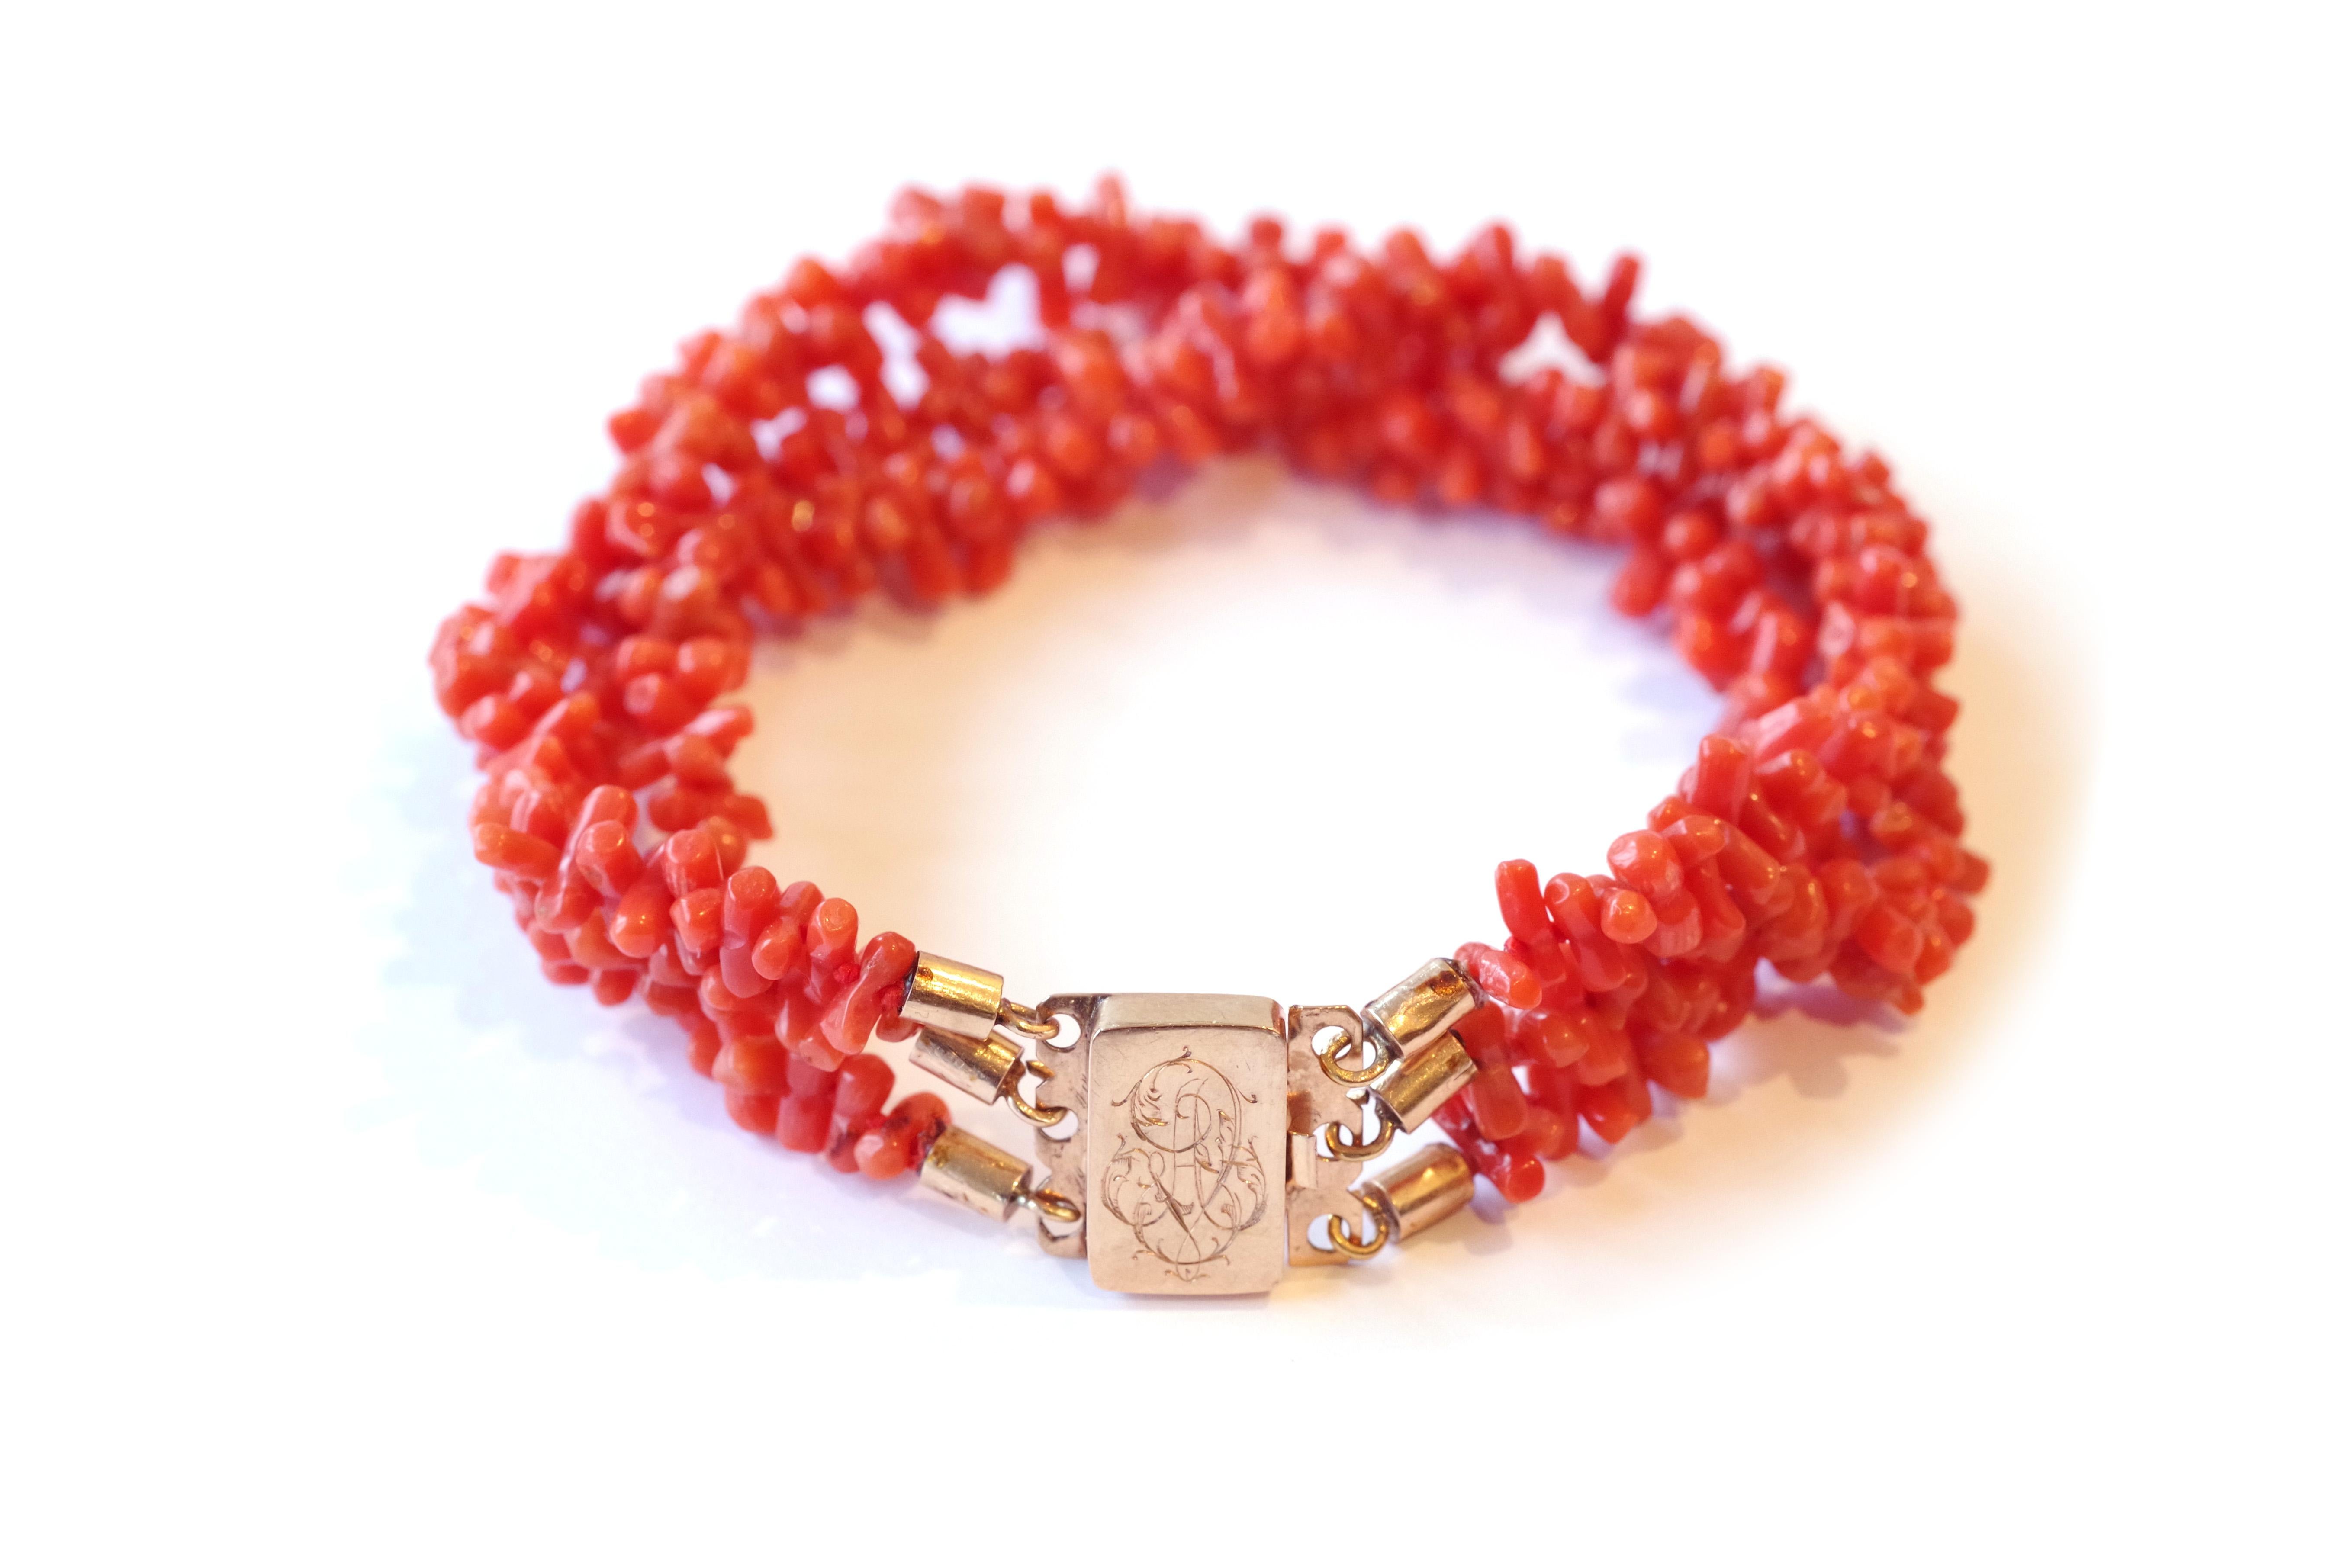 Antique coral bracelet and clasp in 18 karat gold. Antique bracelet formed of three rows of coral sticks, joined by a delightful clasp decorated with letters. The clasp is a 14 karat rose gold box, marked with letters 